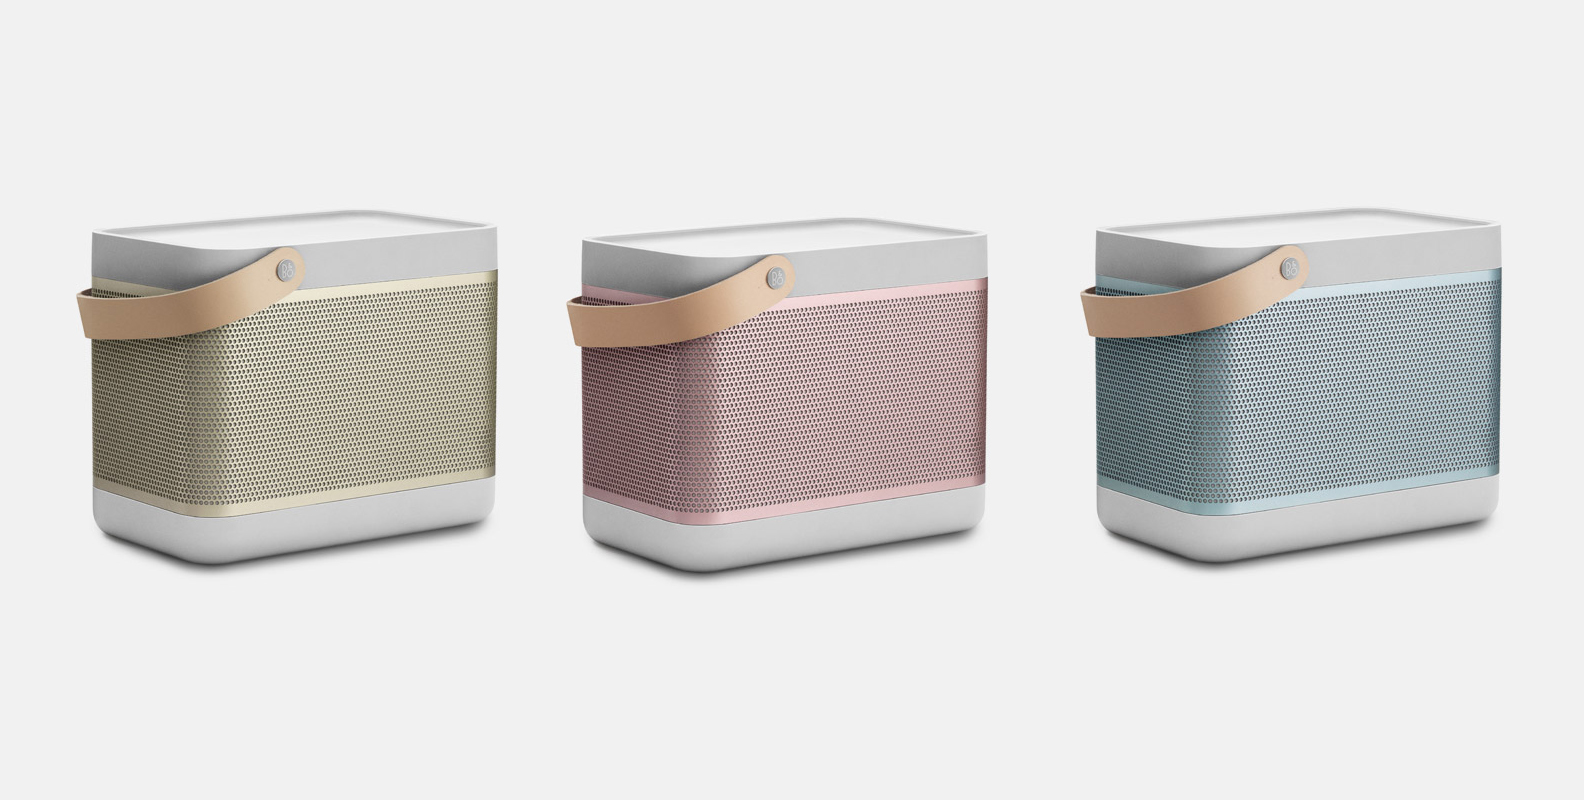 B&O announce their newest Bluetooth speaker the Beolit 15